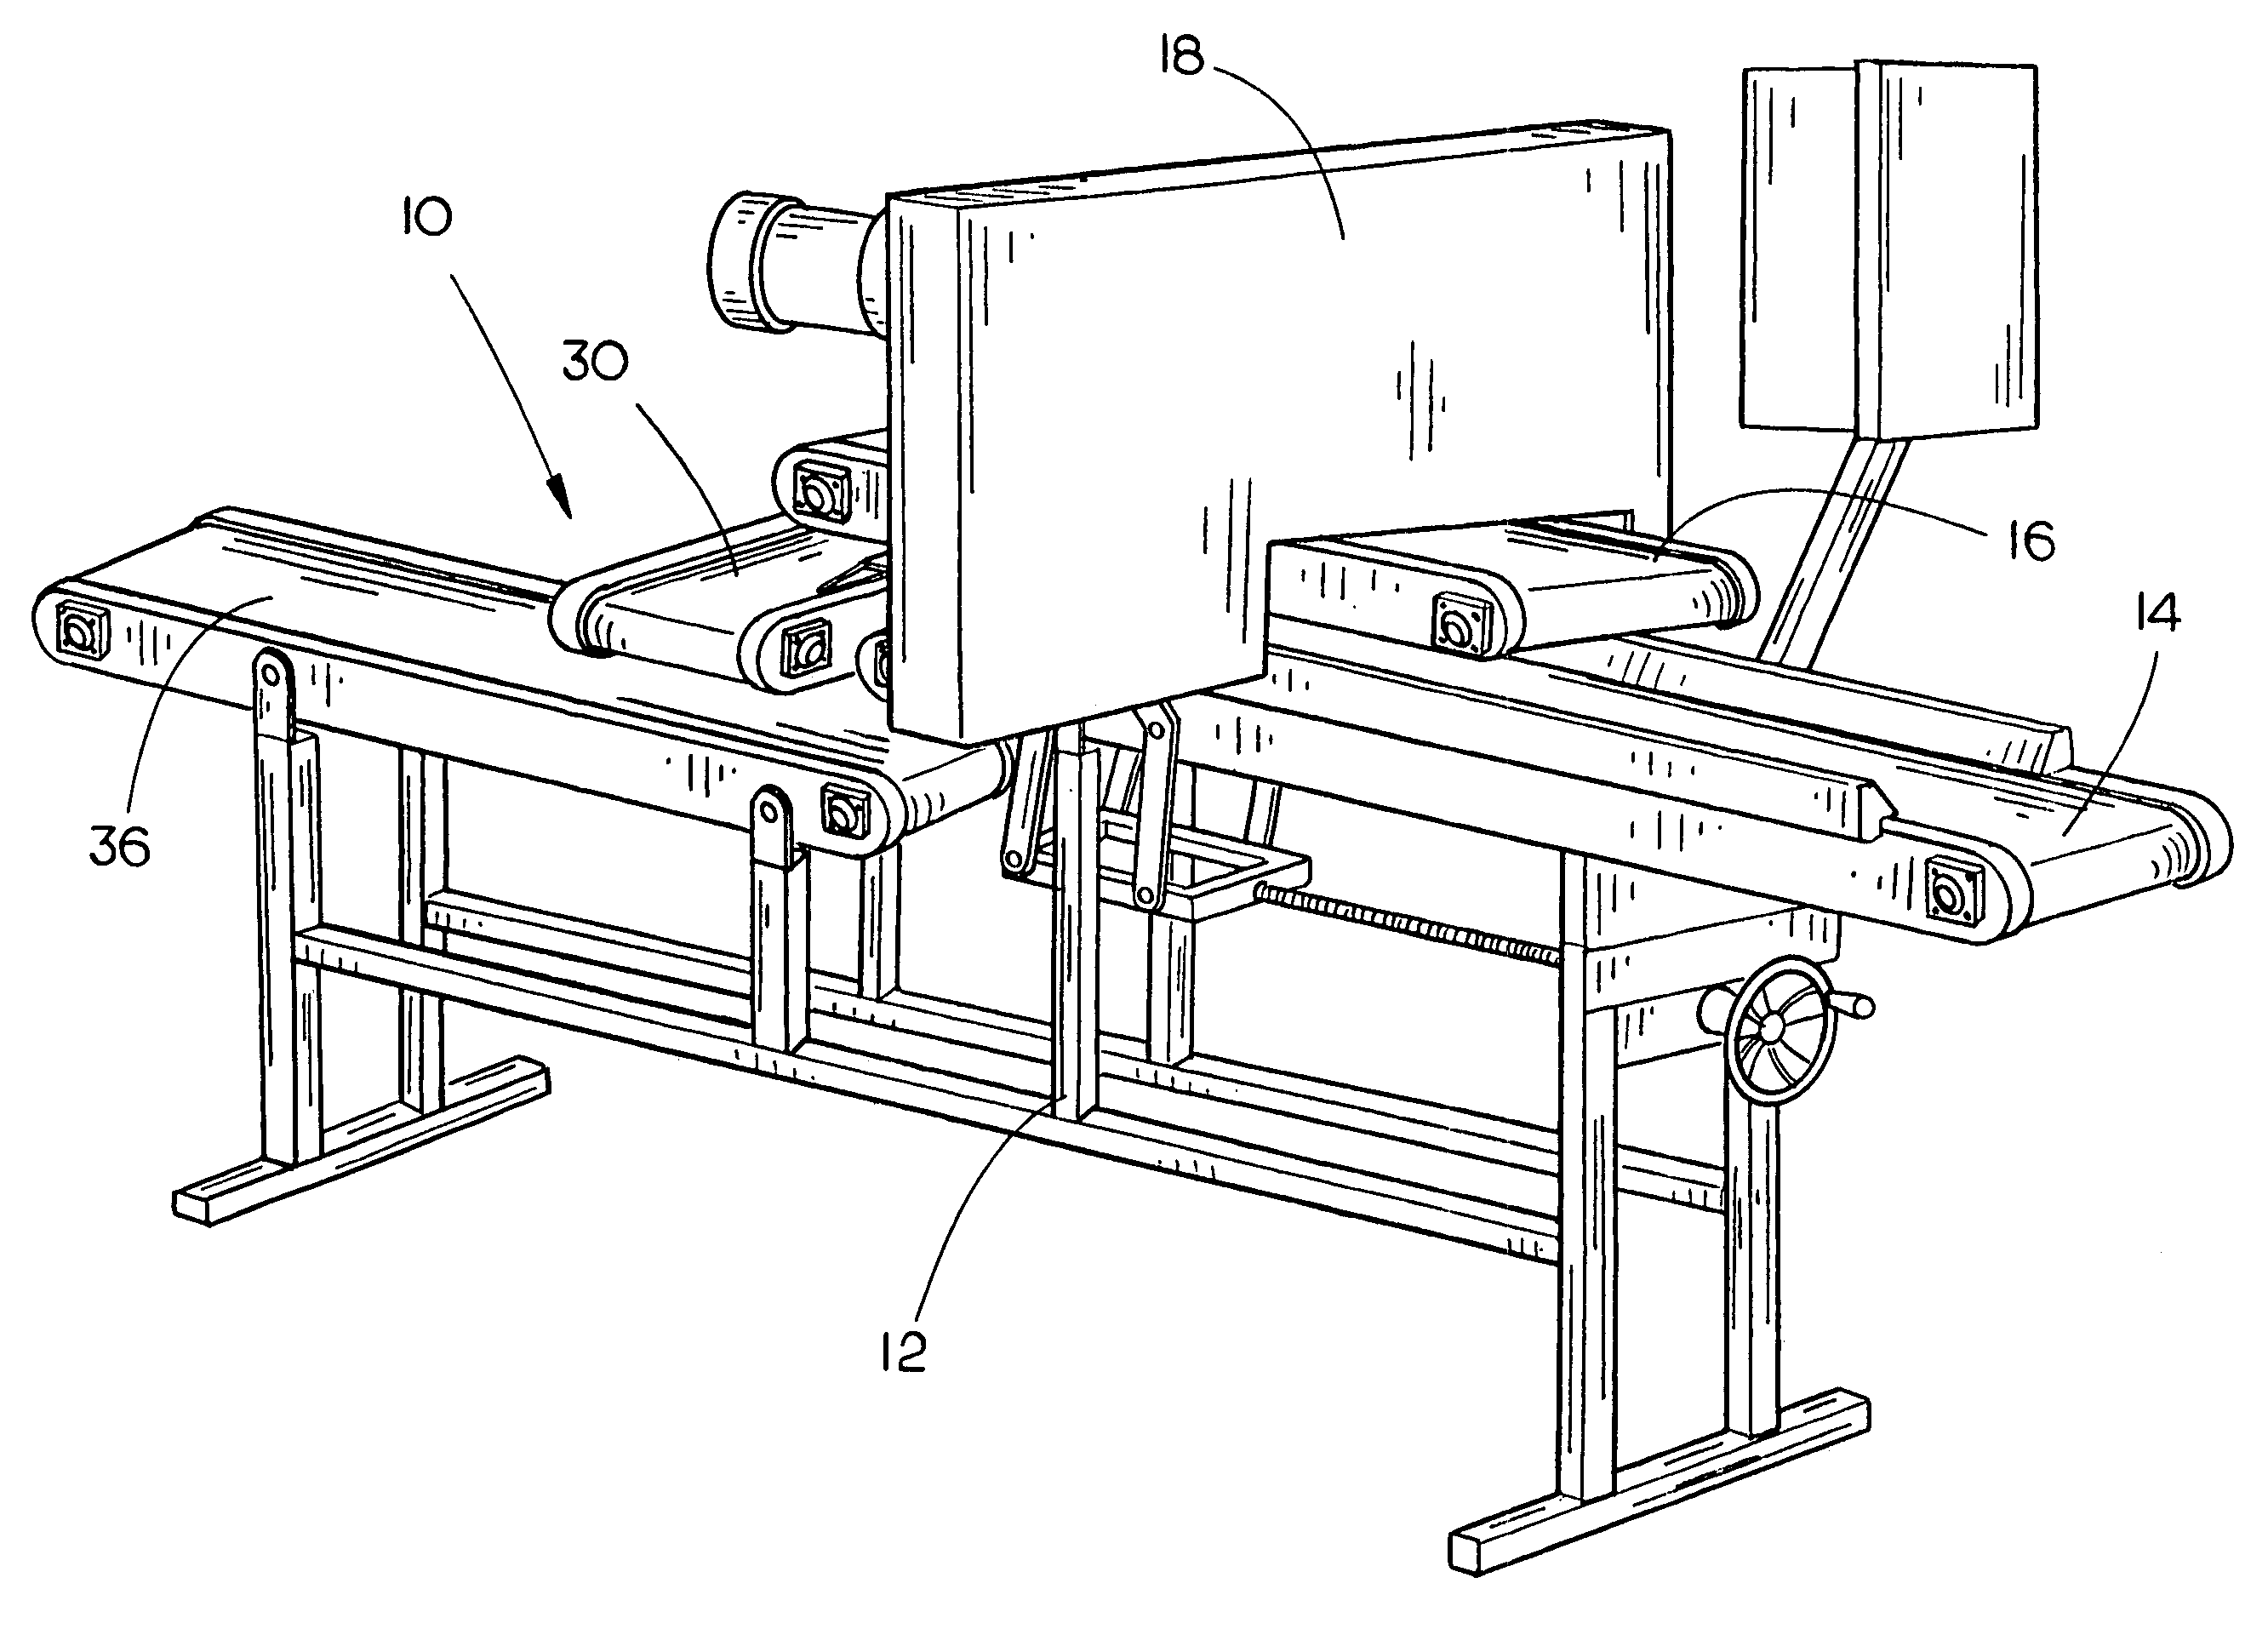 Automatic top slice removal device